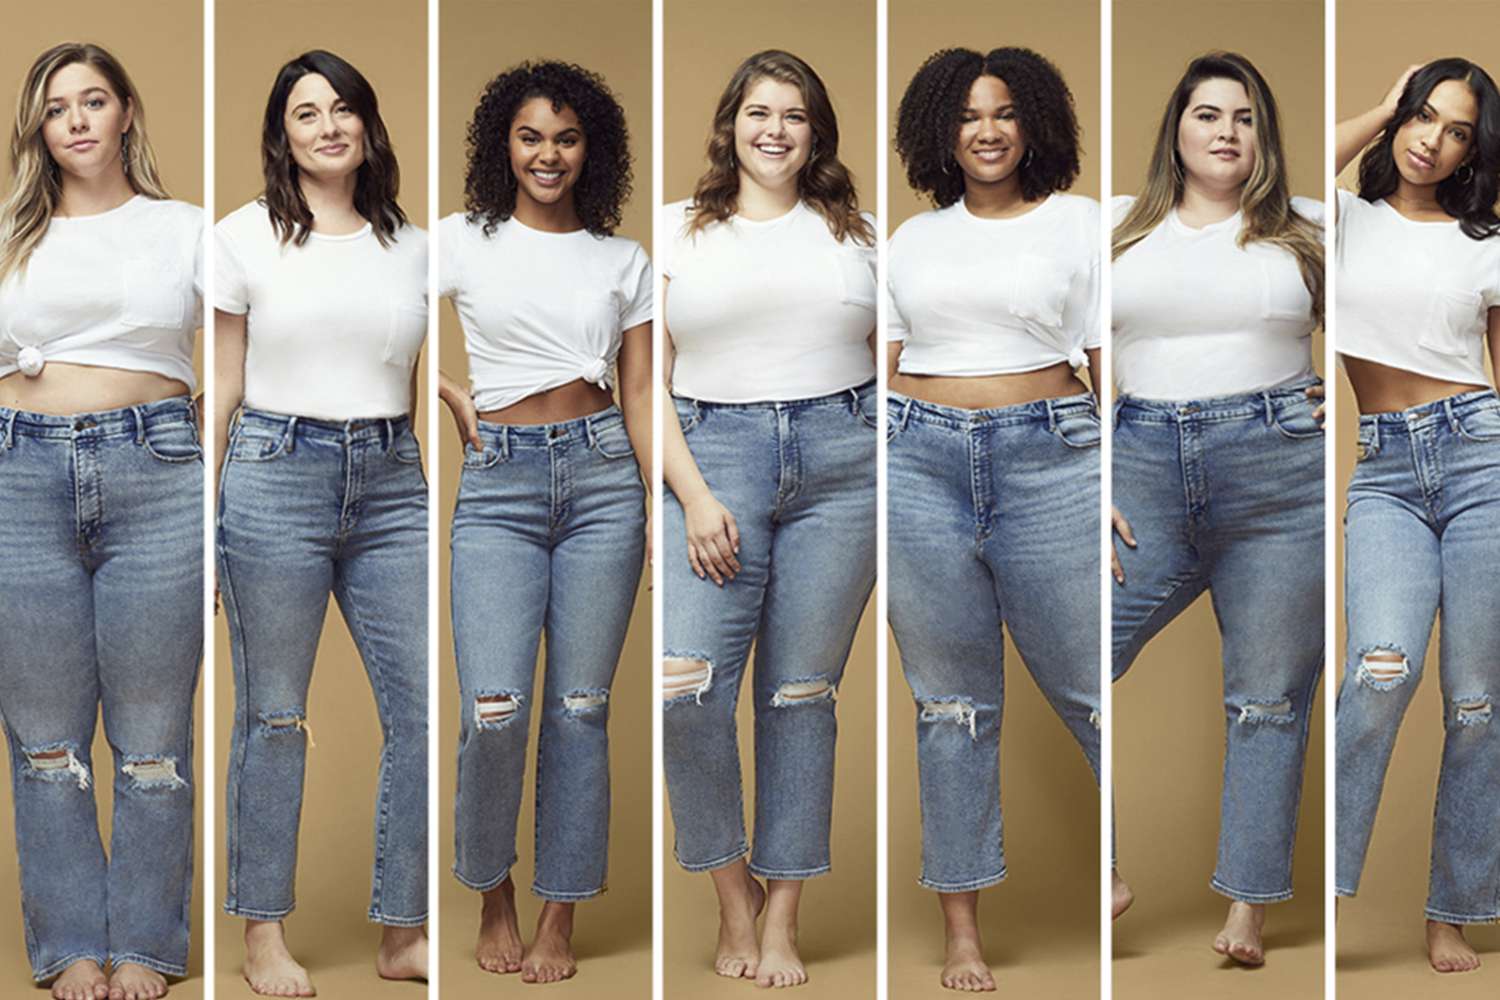 Good American Has the Best-Fitting, Size-Inclusive Jeans | Real Simple